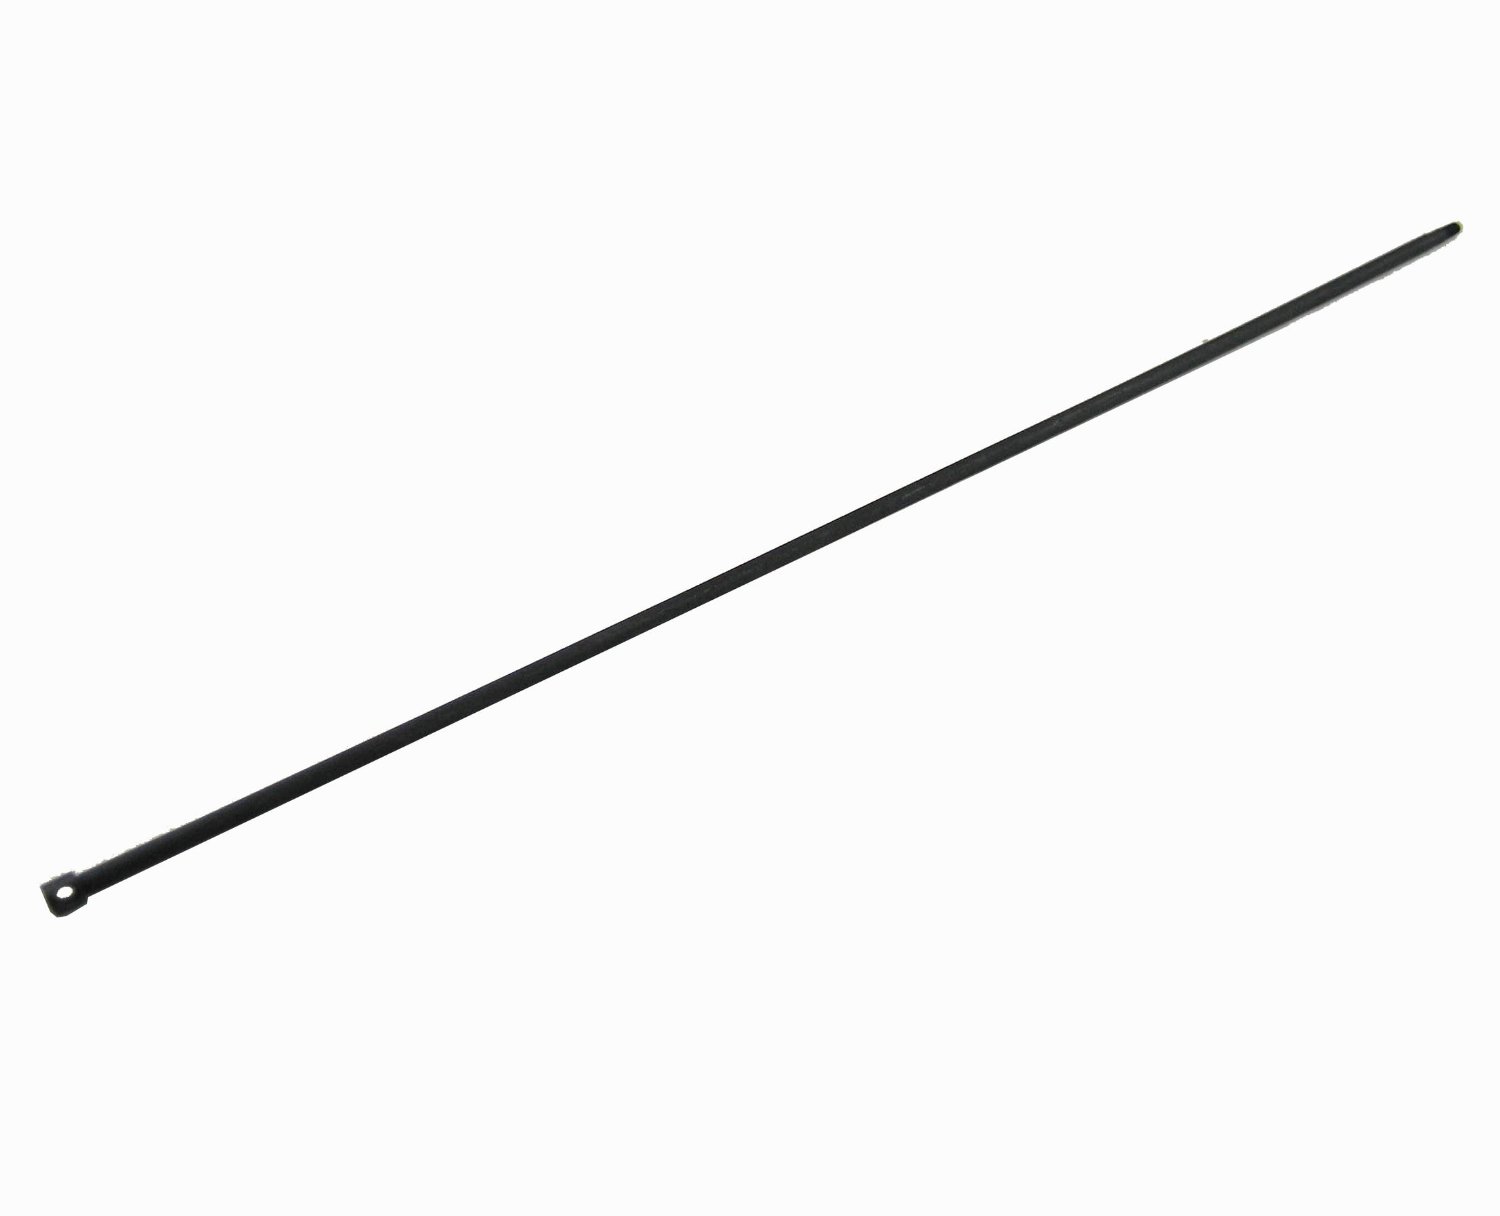 Replacement Steel Cleaning Rod For SKS Rifle